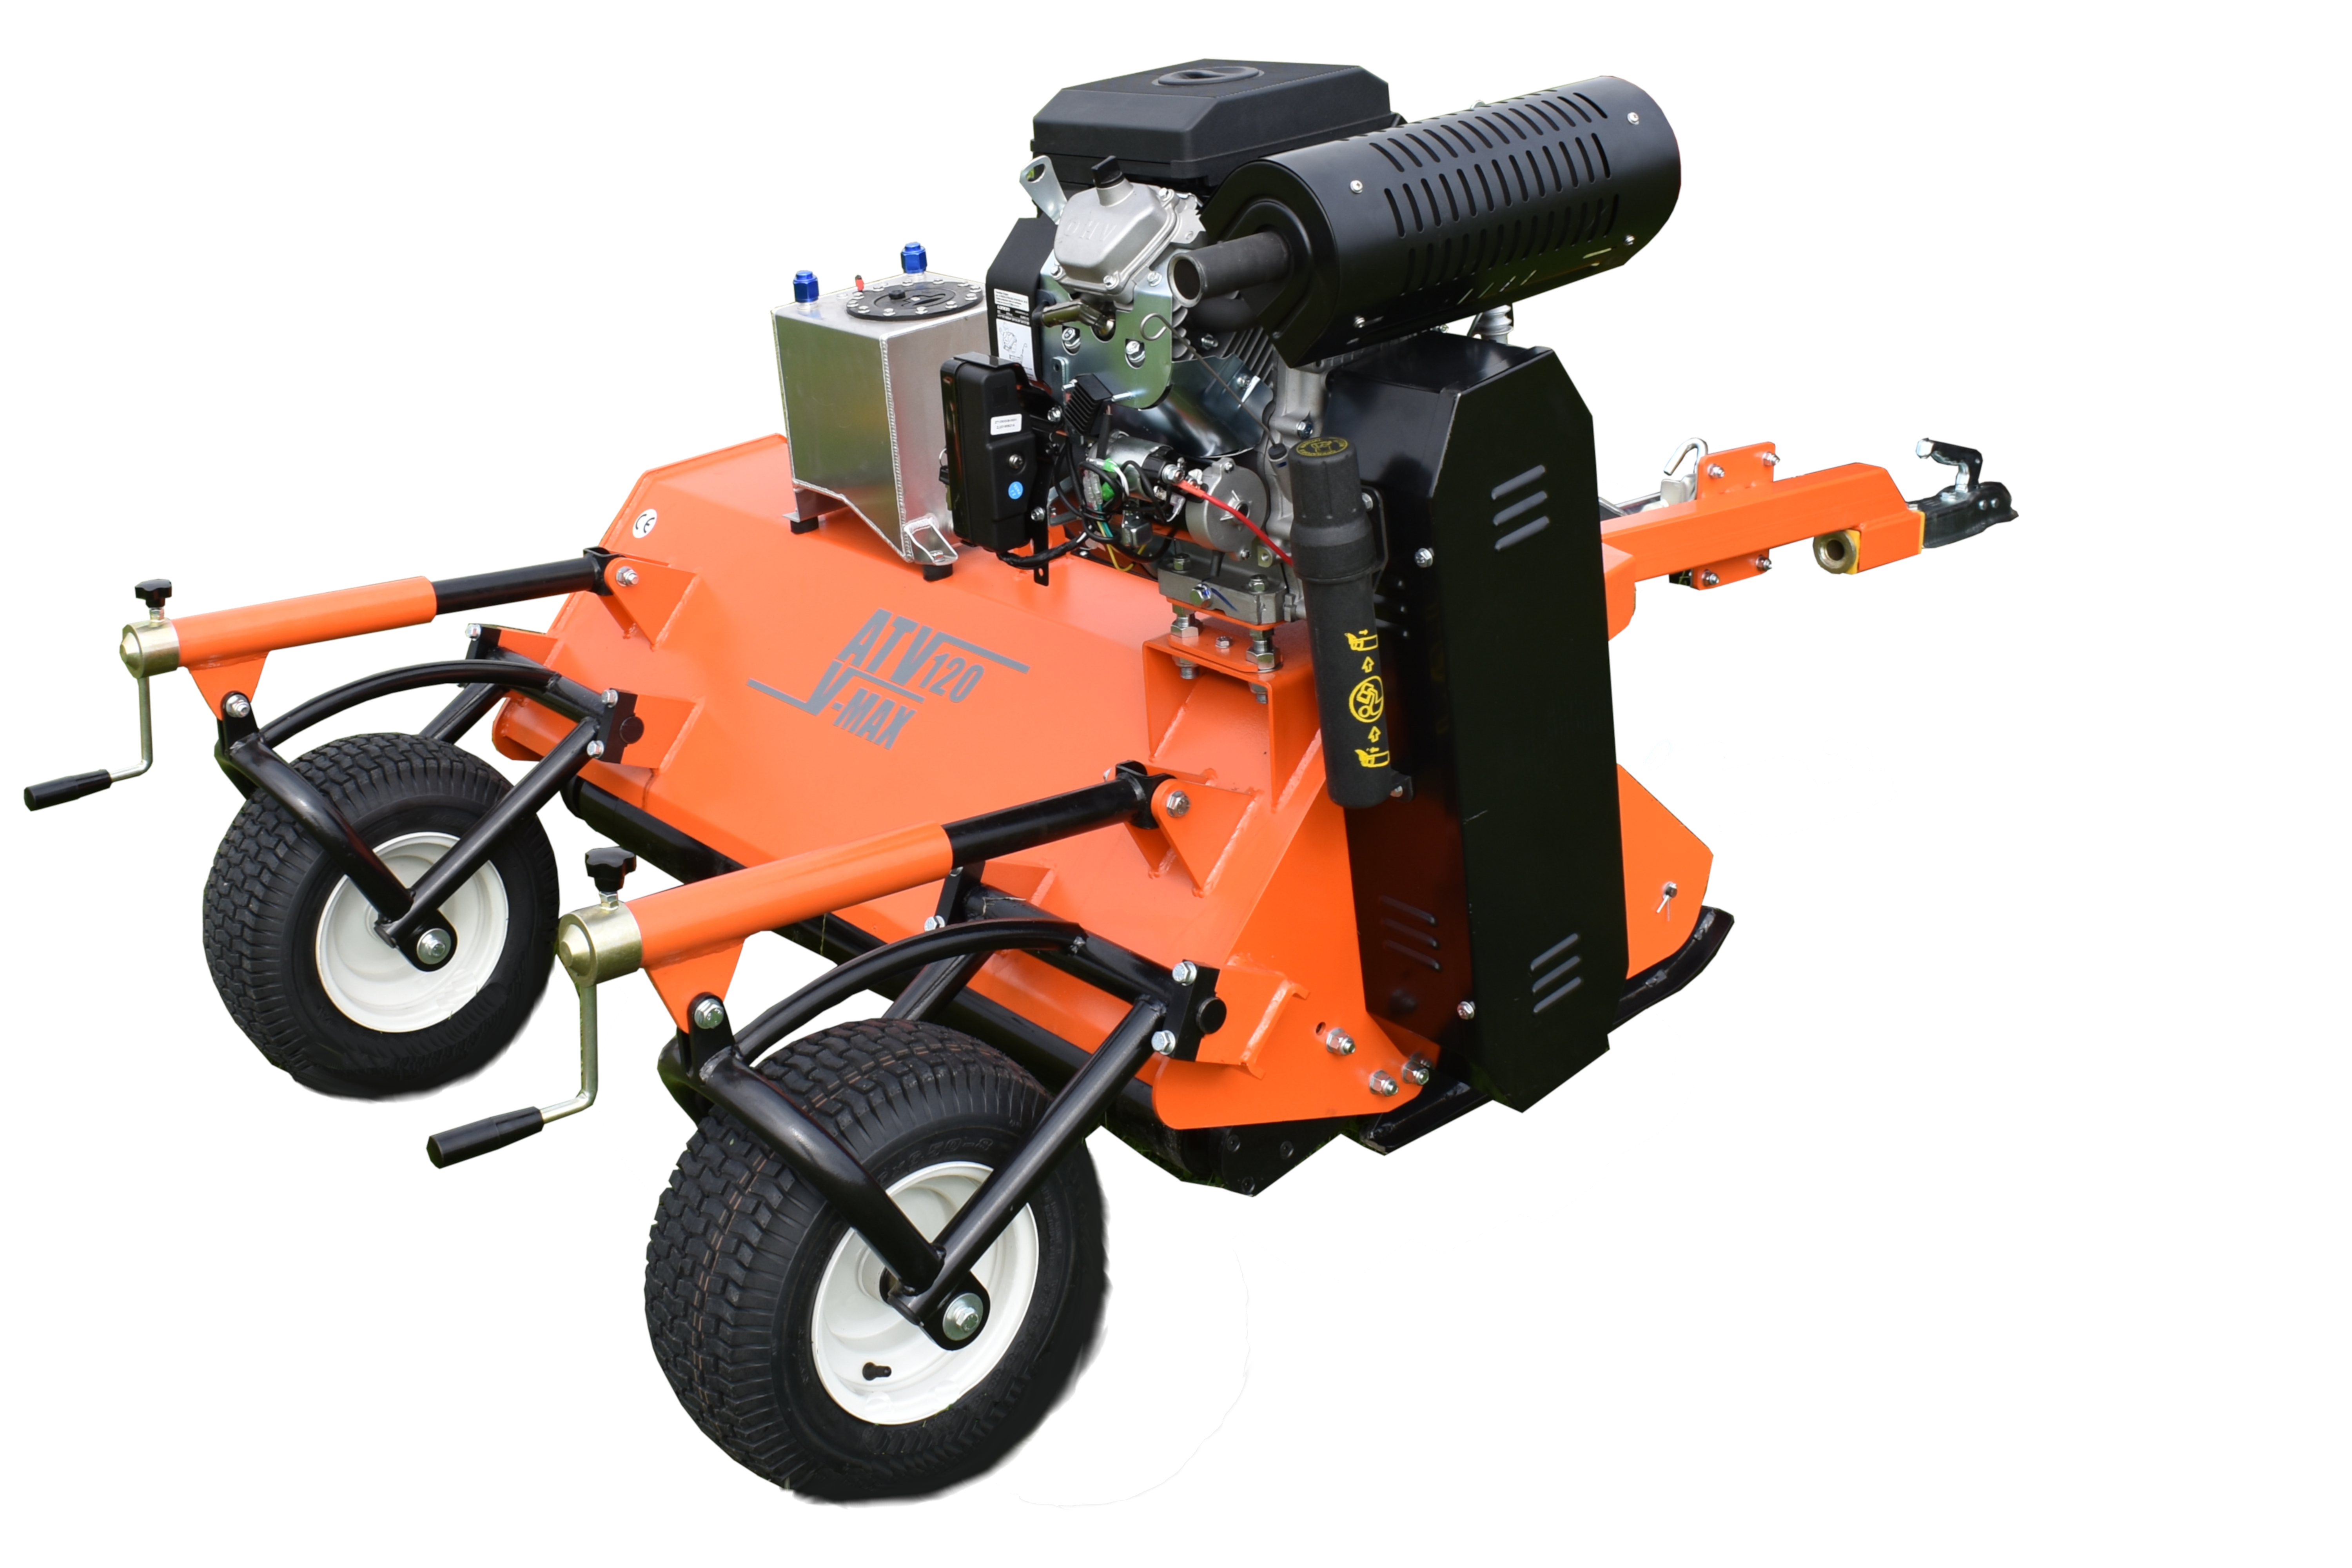 ATV Towable Flail Mower V-Twin 25HP Engine – ATV150 – 25HP – Flail Mowers – 3 Year Warranty – MDL Power Up